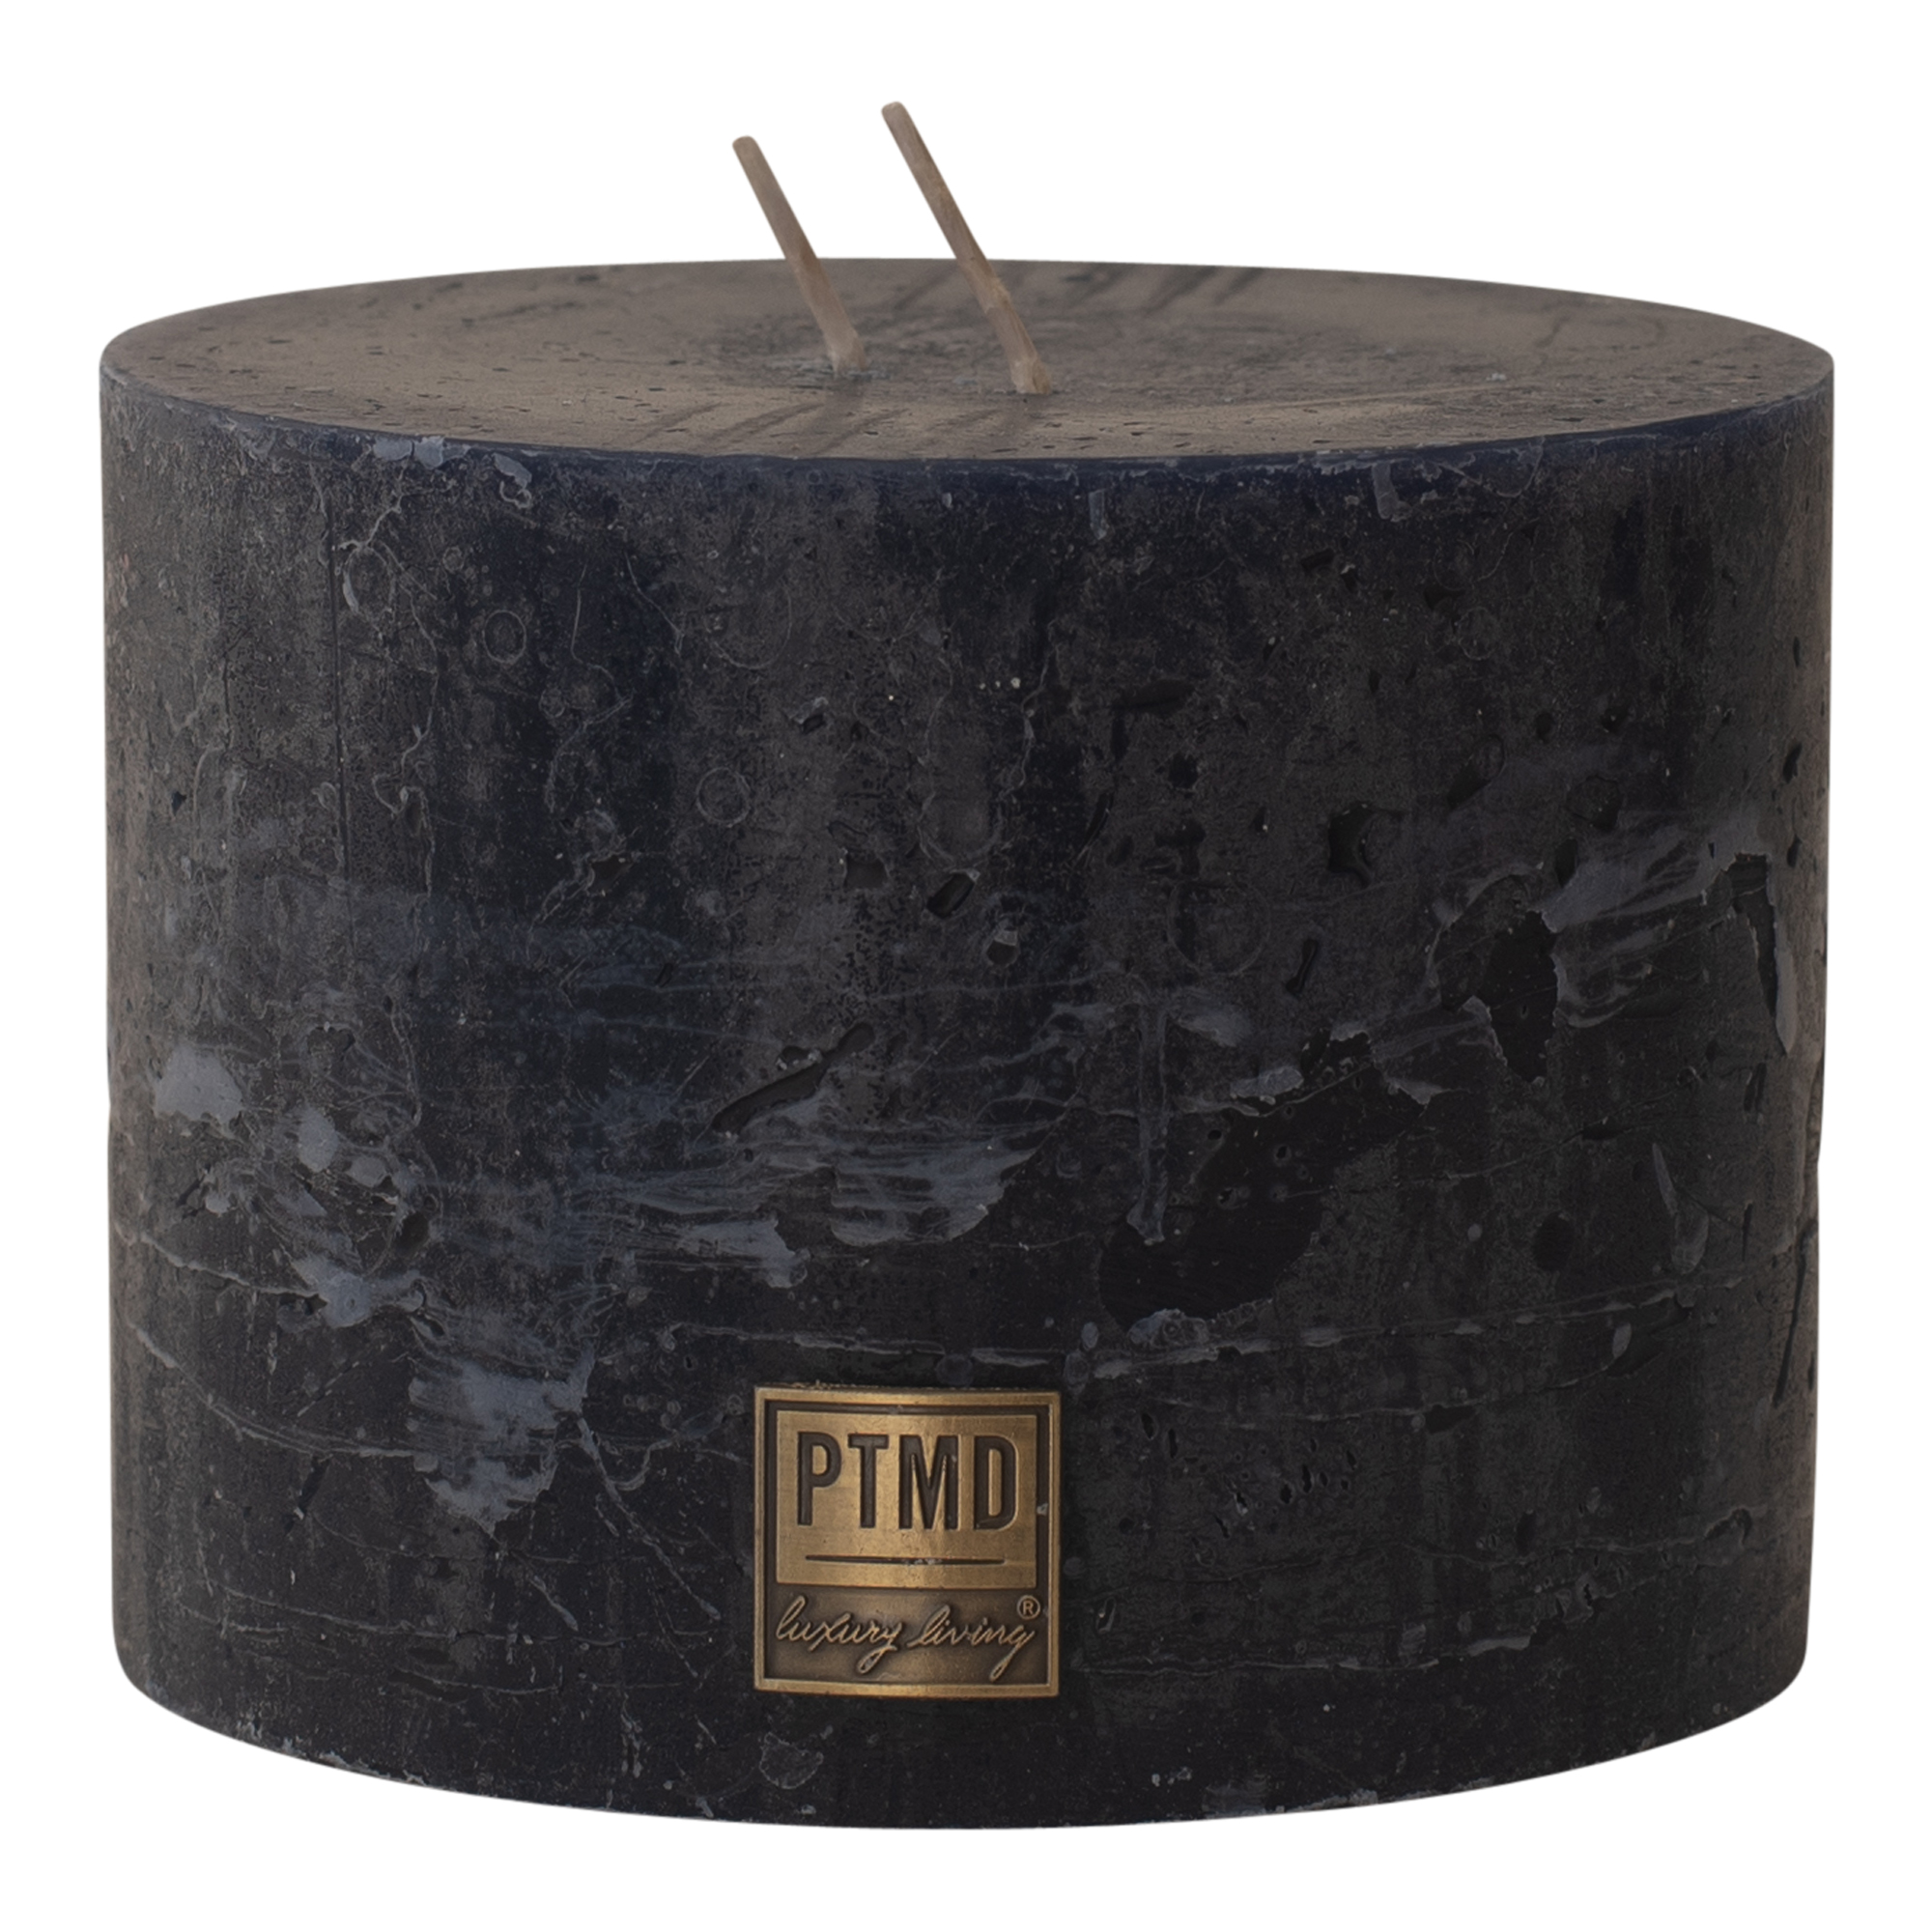 ptmd-9-x-12cm-night-blue-wax-rustic-block-candle